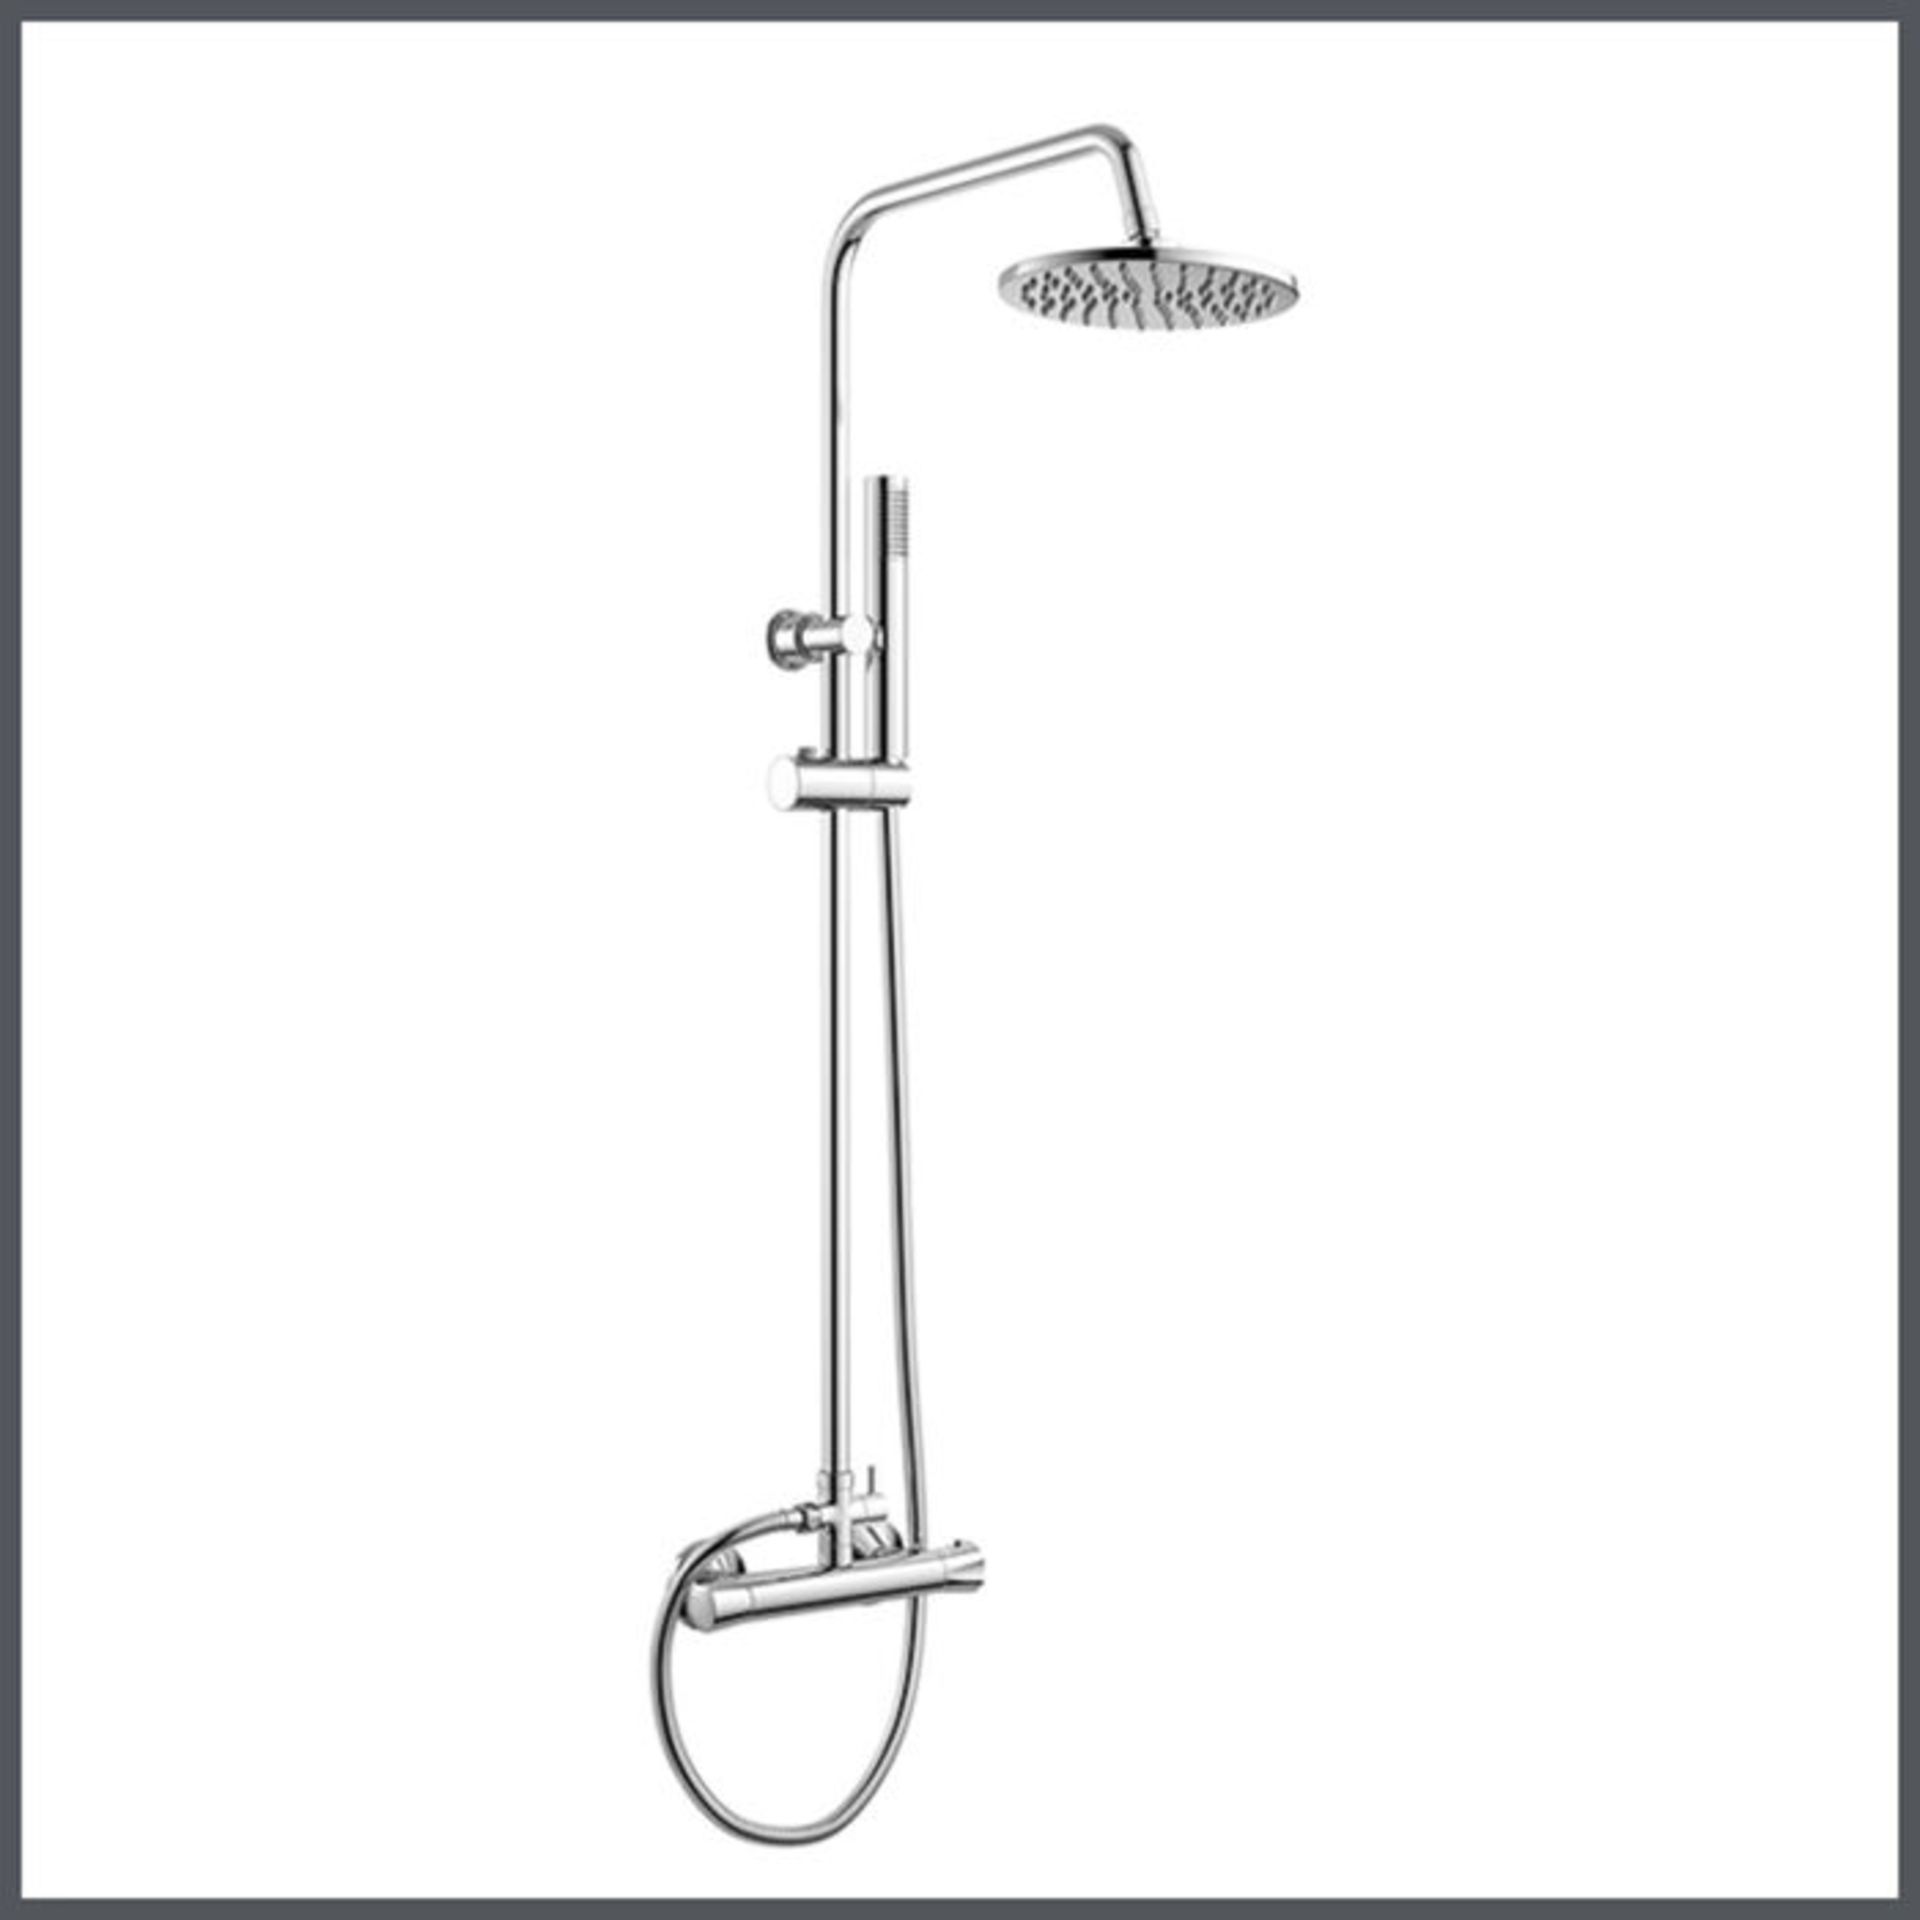 (AA123) Round Exposed Thermostatic Shower Kit. RRP £349.99. Style meets function with our gor...